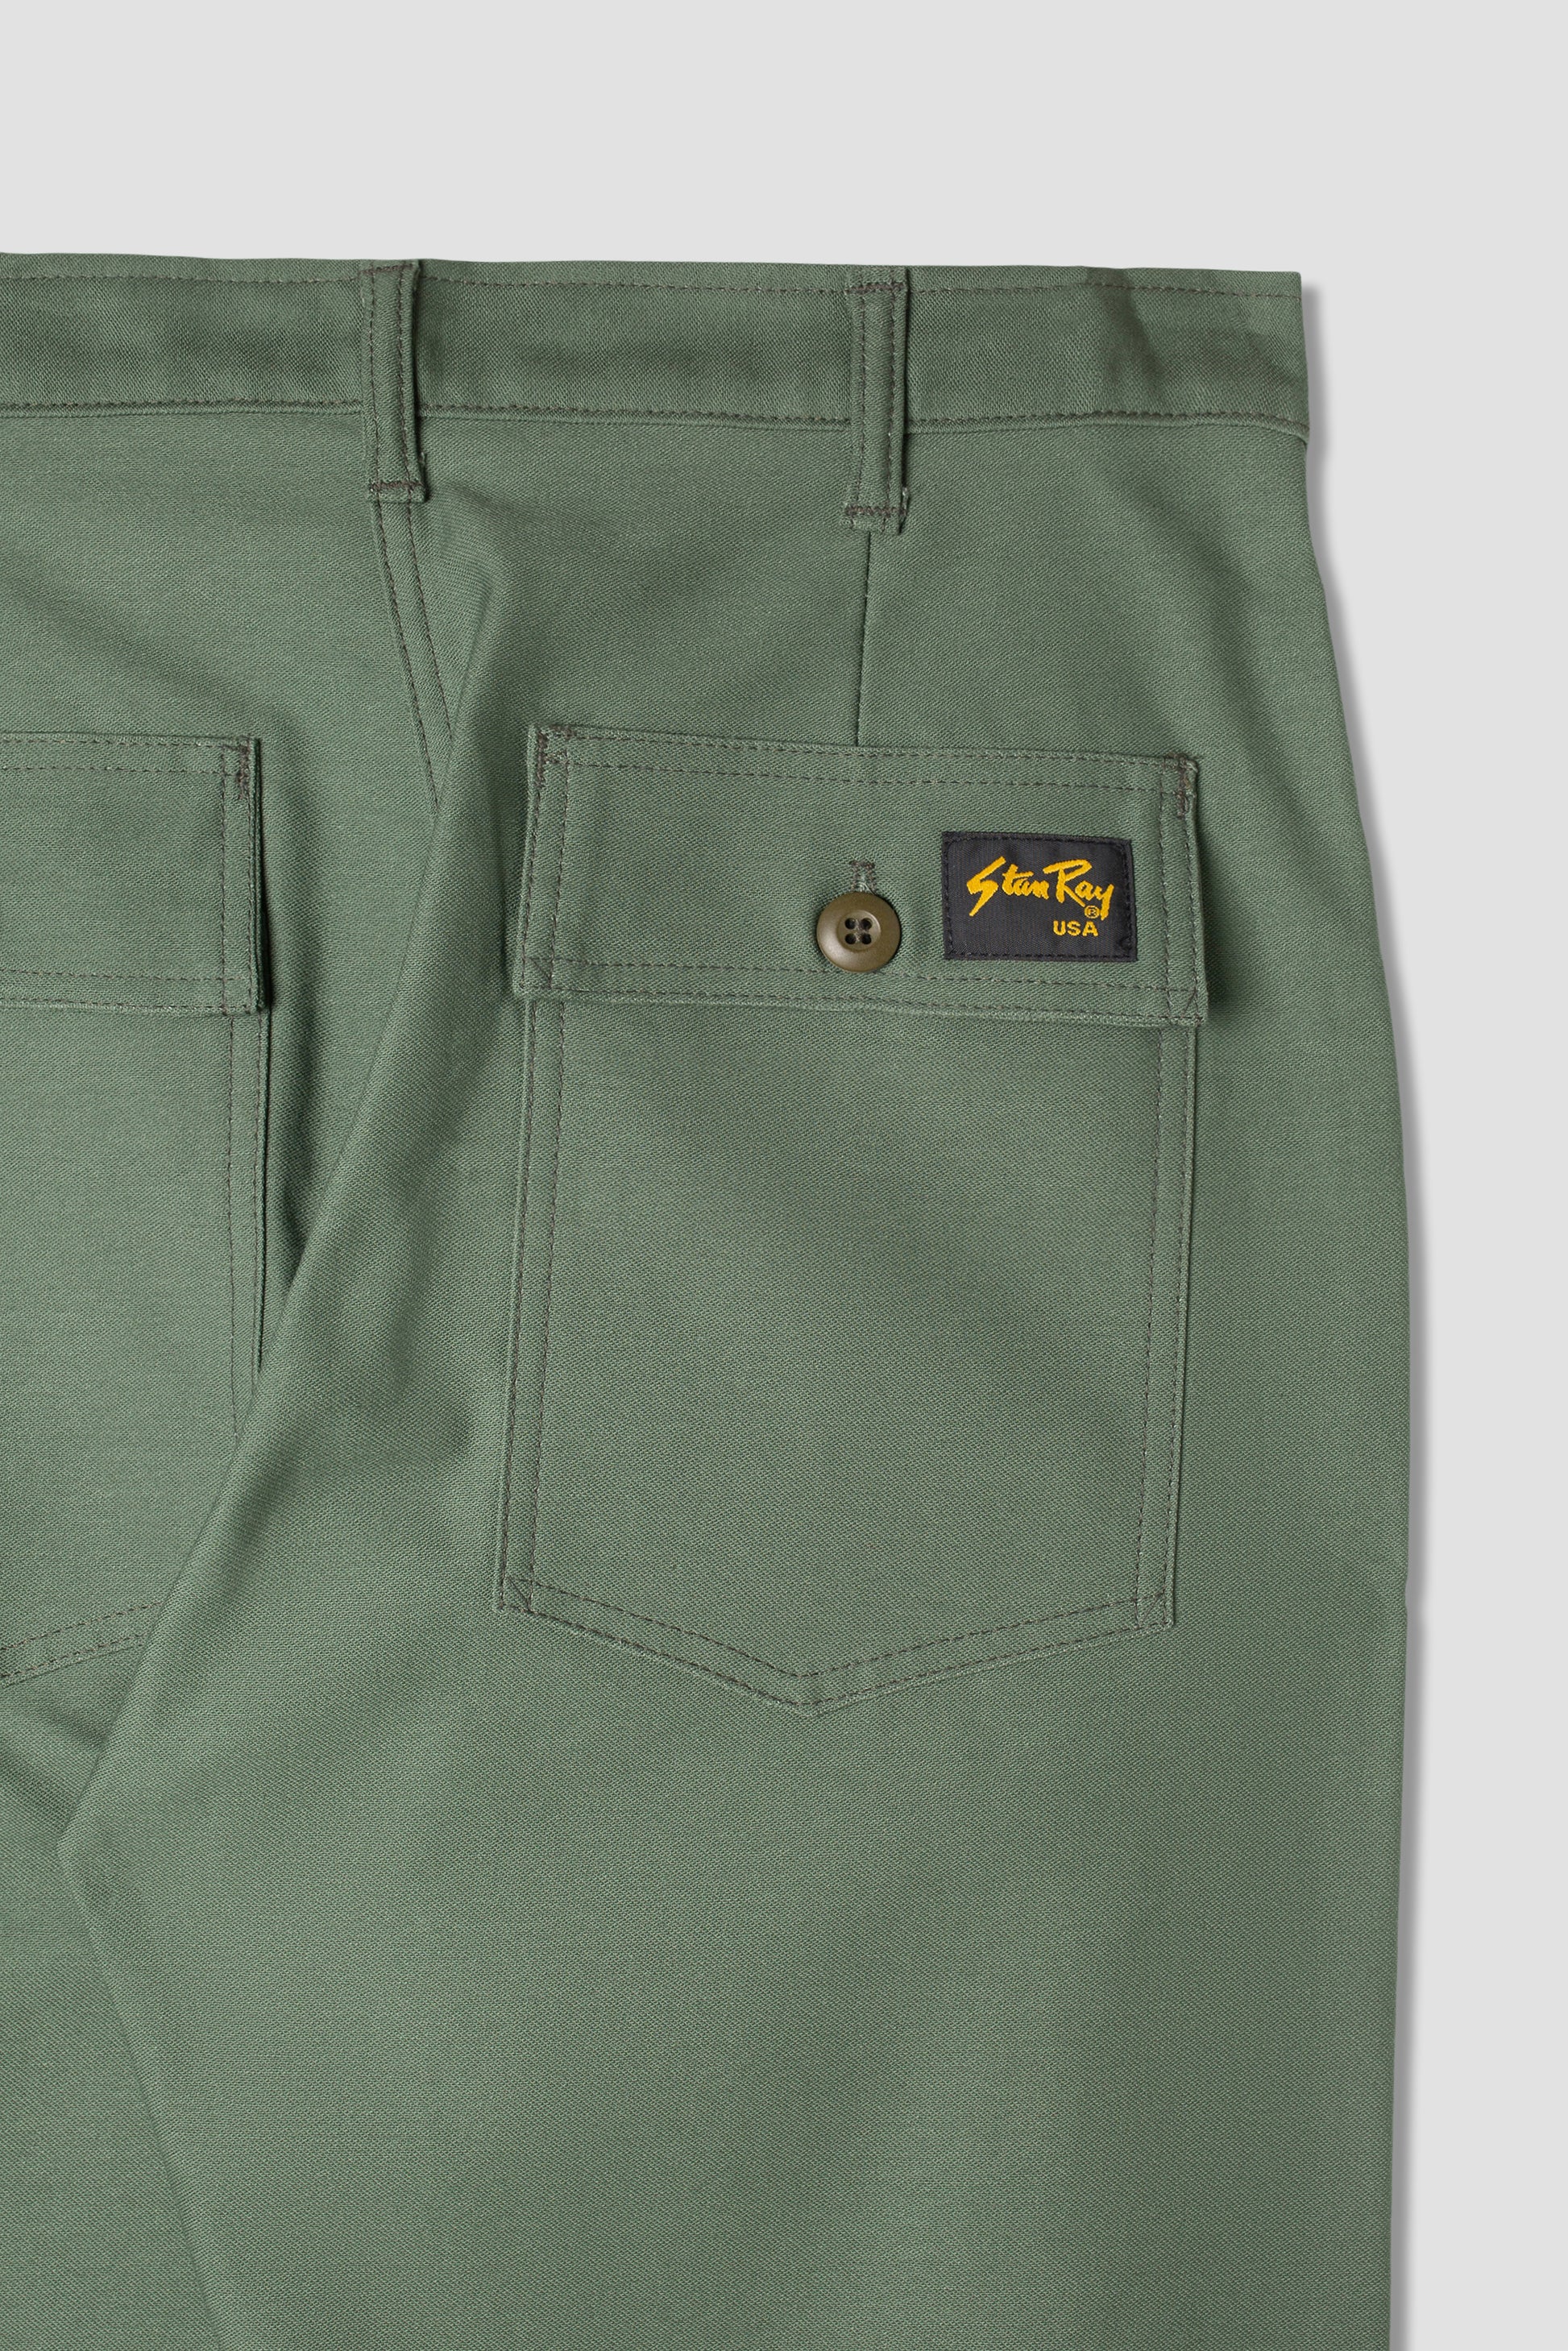 Taper Fatigue (Olive Sateen 8.5oz) – Stan Ray